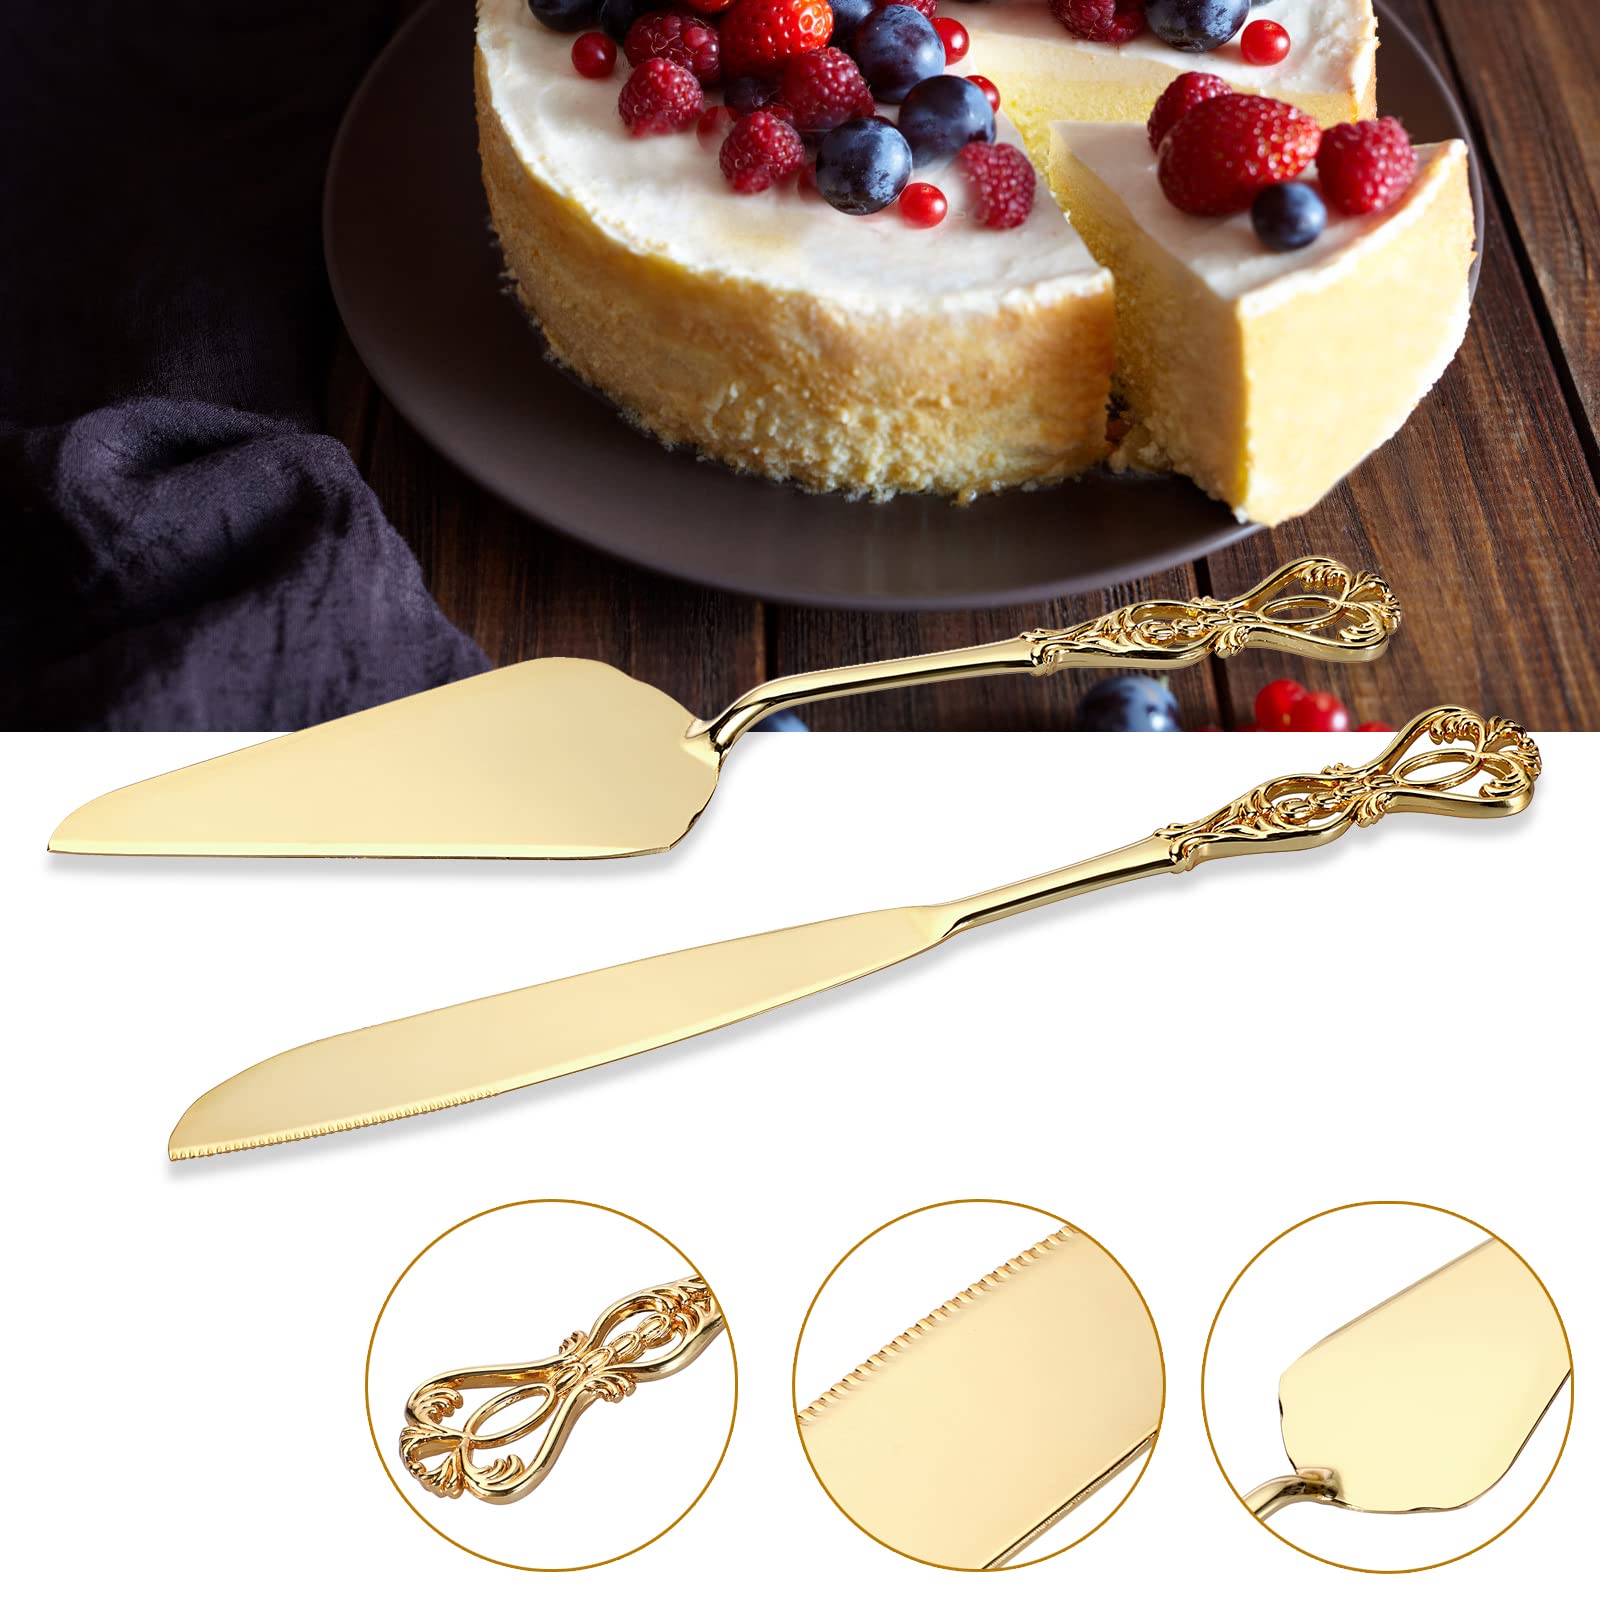 BSTKEY Gold Cake Knife and Server Set, Cake Pie Pastry Servers Crown Shape Handle Vintage Cake Serving Set for Wedding Birthday Parties Anniversary Christmas and Events